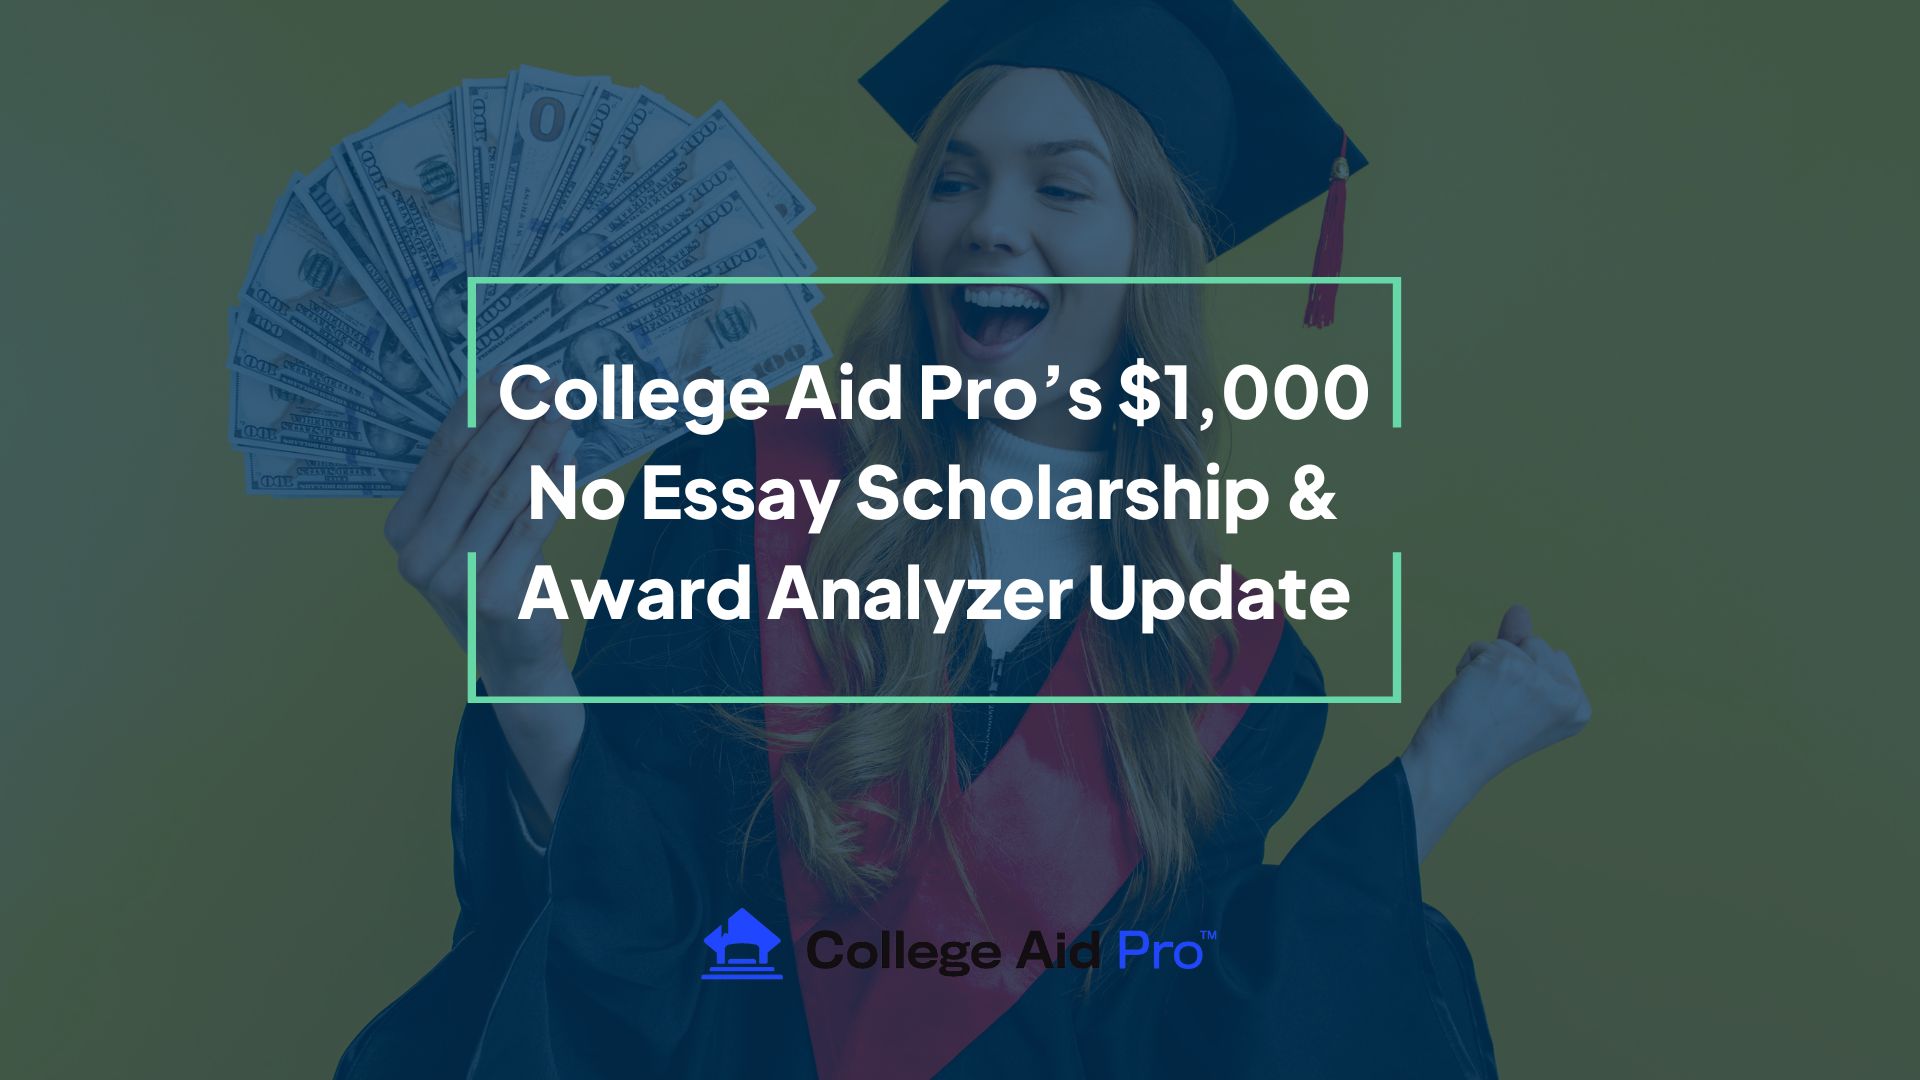 No Essay scholarship money in a graduate's hand with diploma